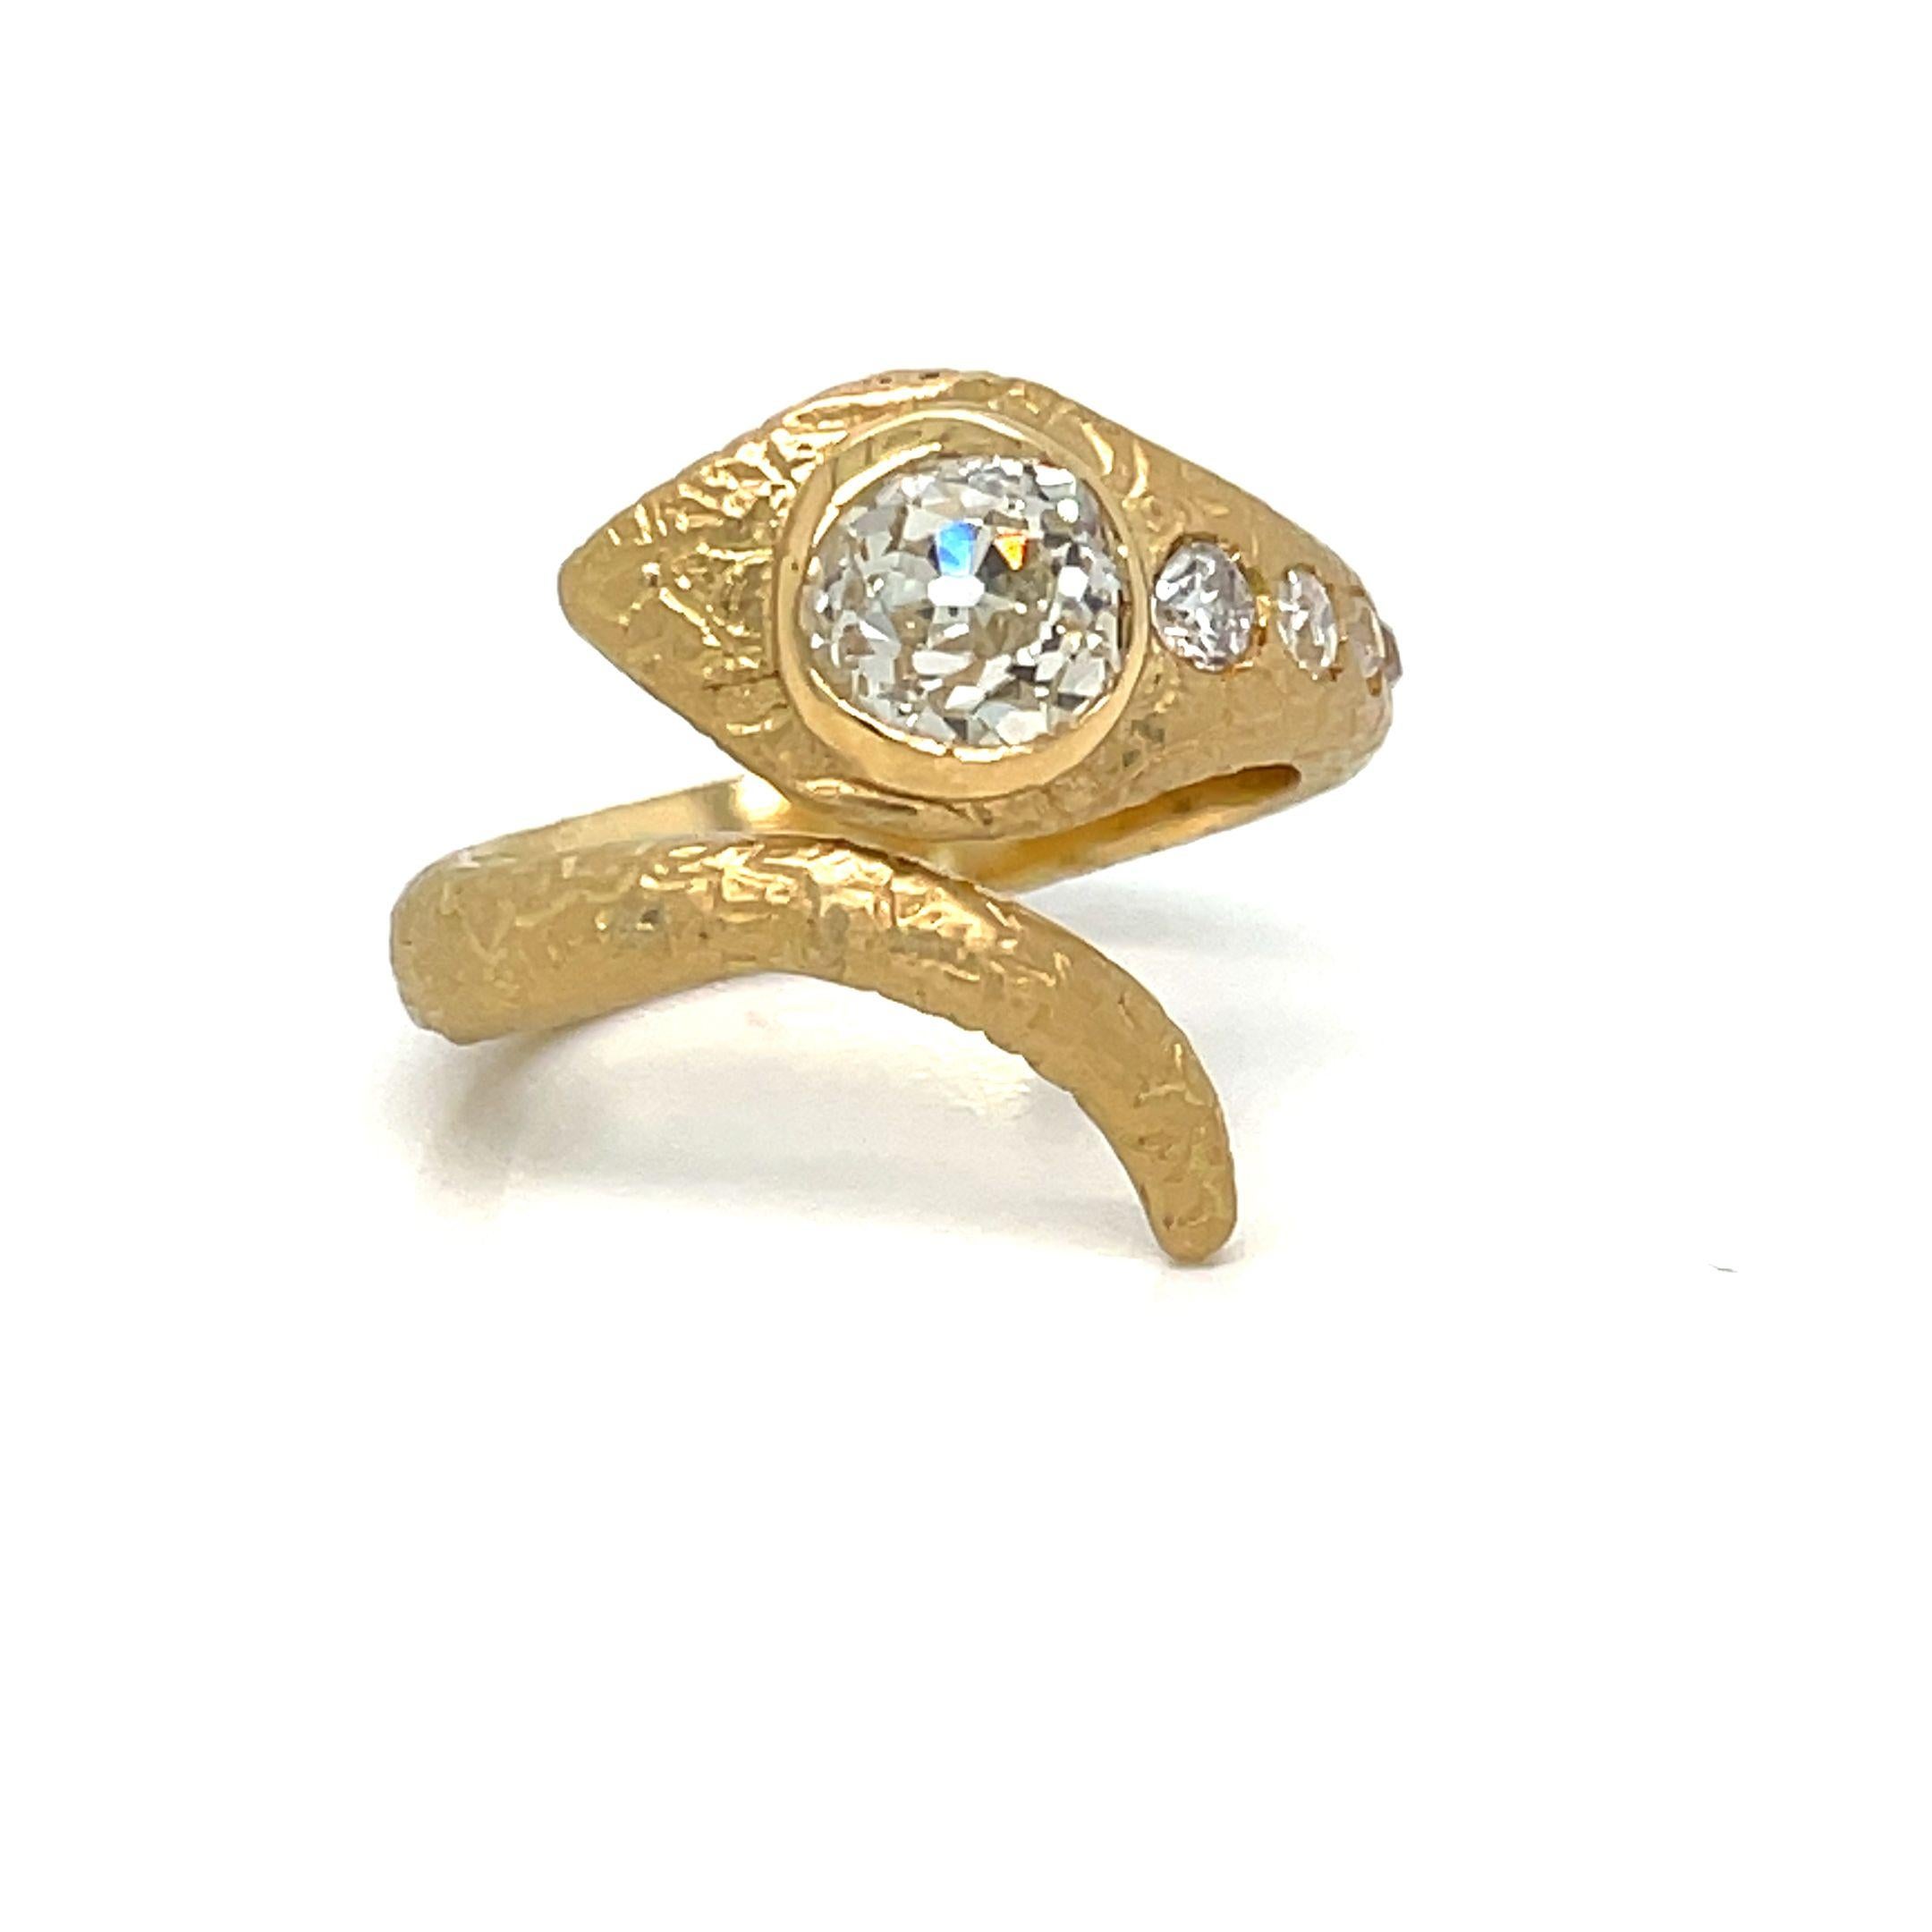 Gorgeous design ring, dated '1900, handcrafted in 18K gold. The head of the snake is embellished with a large sparkling Old mine cut Diamond eye, weight 1,30 Carat graded I/J Color Si2, and following 5 smaller diamonds in order of size, total weight